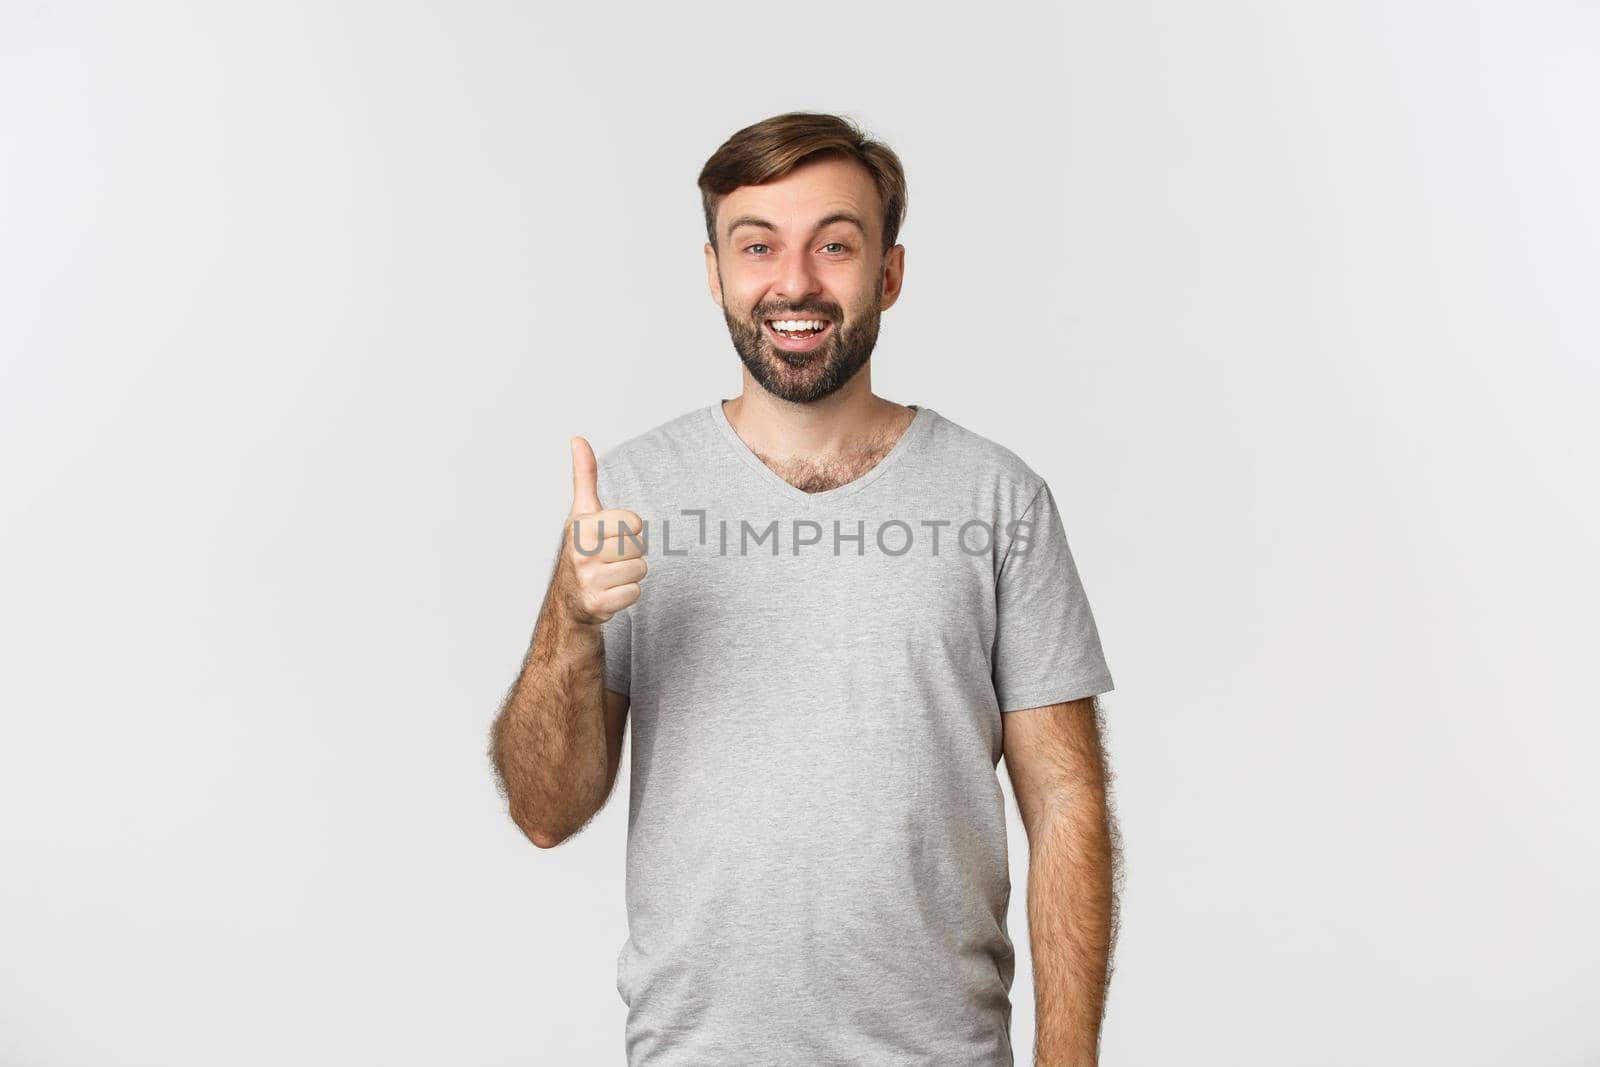 Image of satisfied smiling man in gray t-shirt, showing thumbs-up in approval, praising good choice, white background.